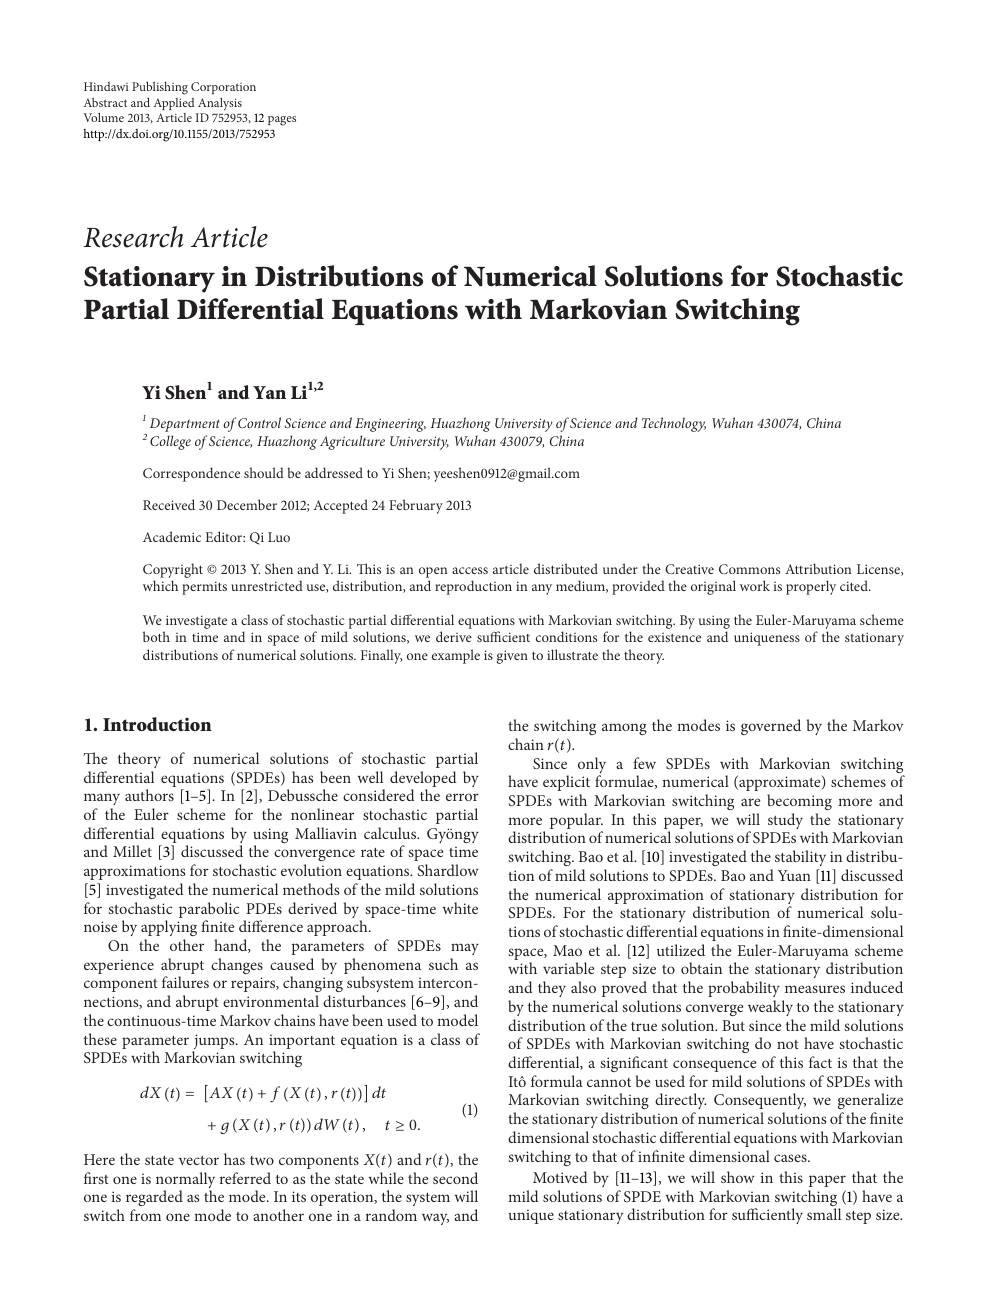 Stationary In Distributions Of Numerical Solutions For Stochastic Partial Differential Equations With Markovian Switching Topic Of Research Paper In Mathematics Download Scholarly Article Pdf And Read For Free On Cyberleninka Open